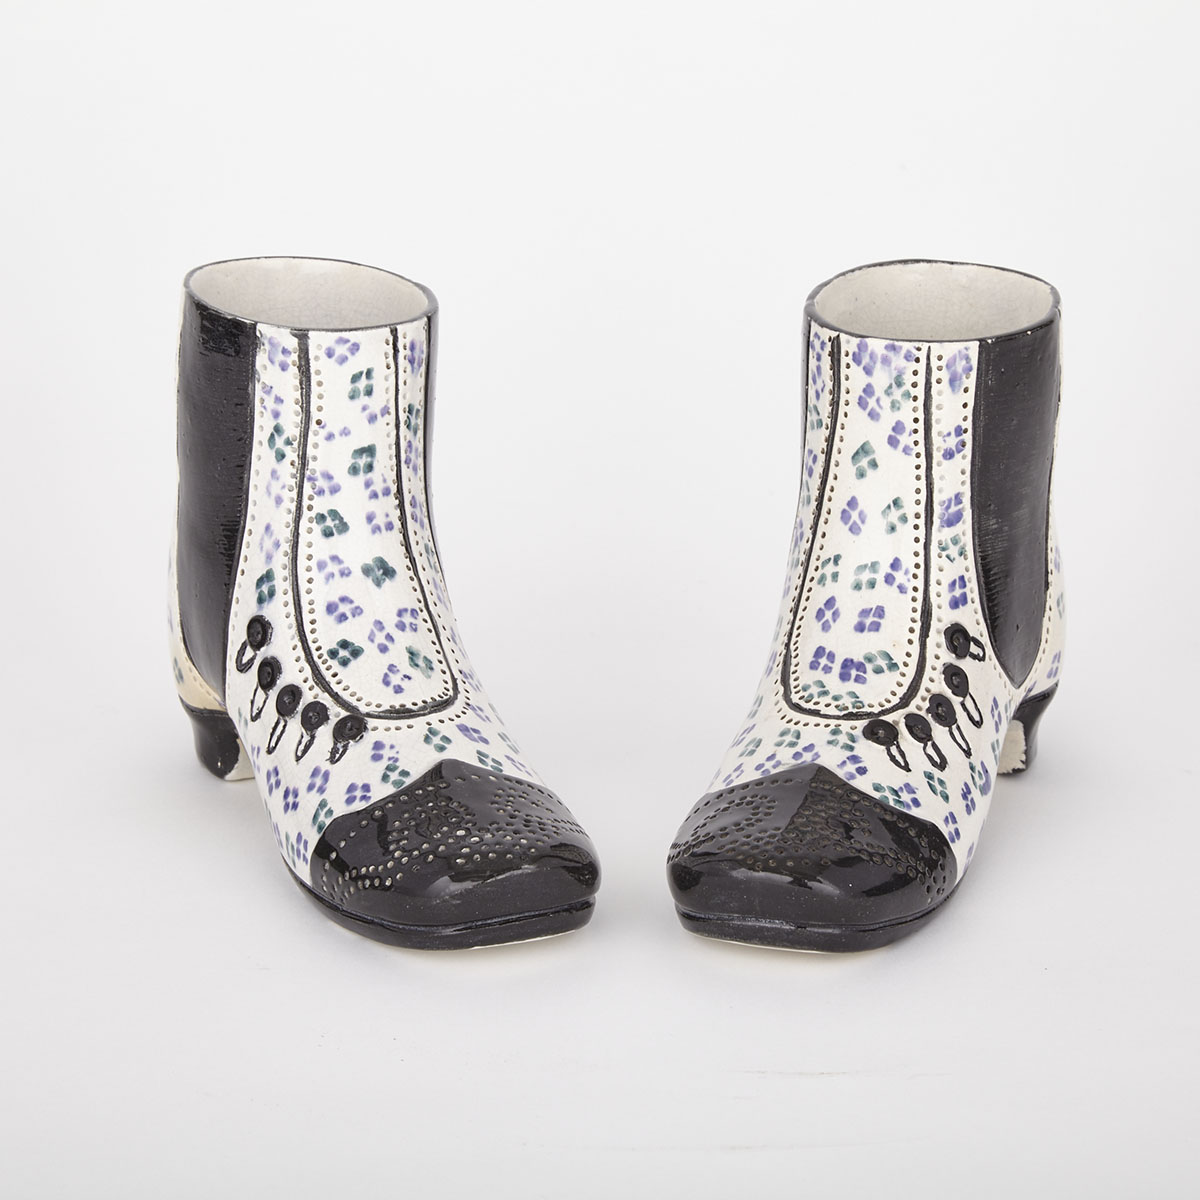 Pair of Staffordshire Pearlware Shoe-form Vases, c.1840-60